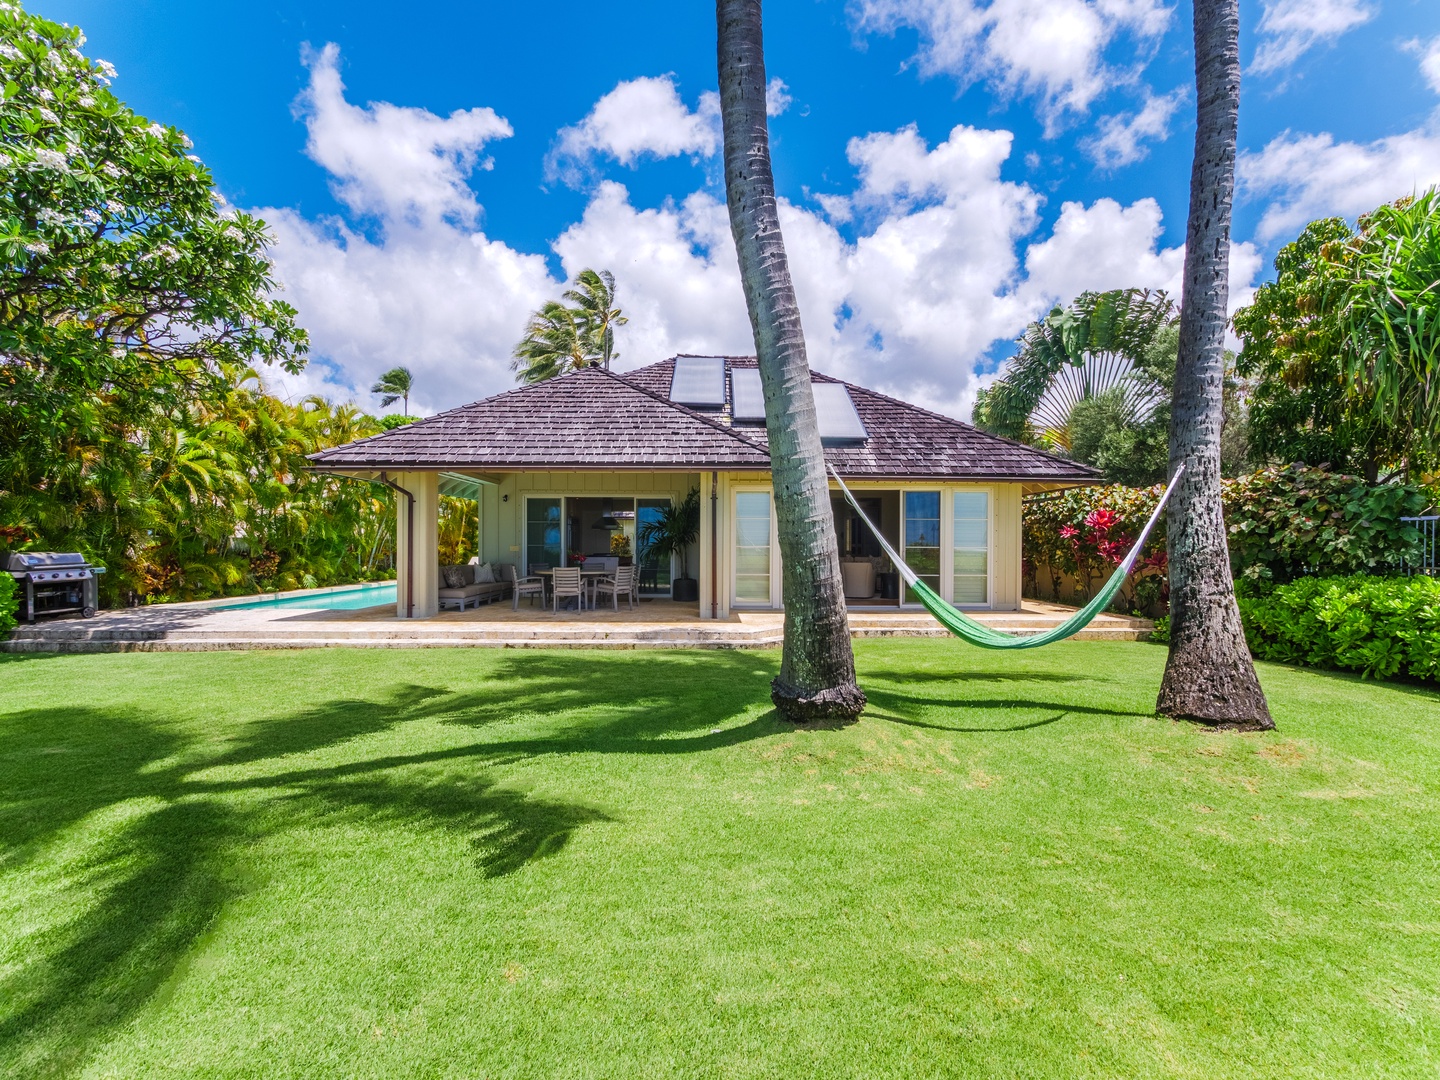 Honolulu Vacation Rentals, Paradise Beach Estate - Embrace the essence of island living, where the soothing sea breeze mingles with a tranquil way of life, offering an unparalleled escape from the everyday.